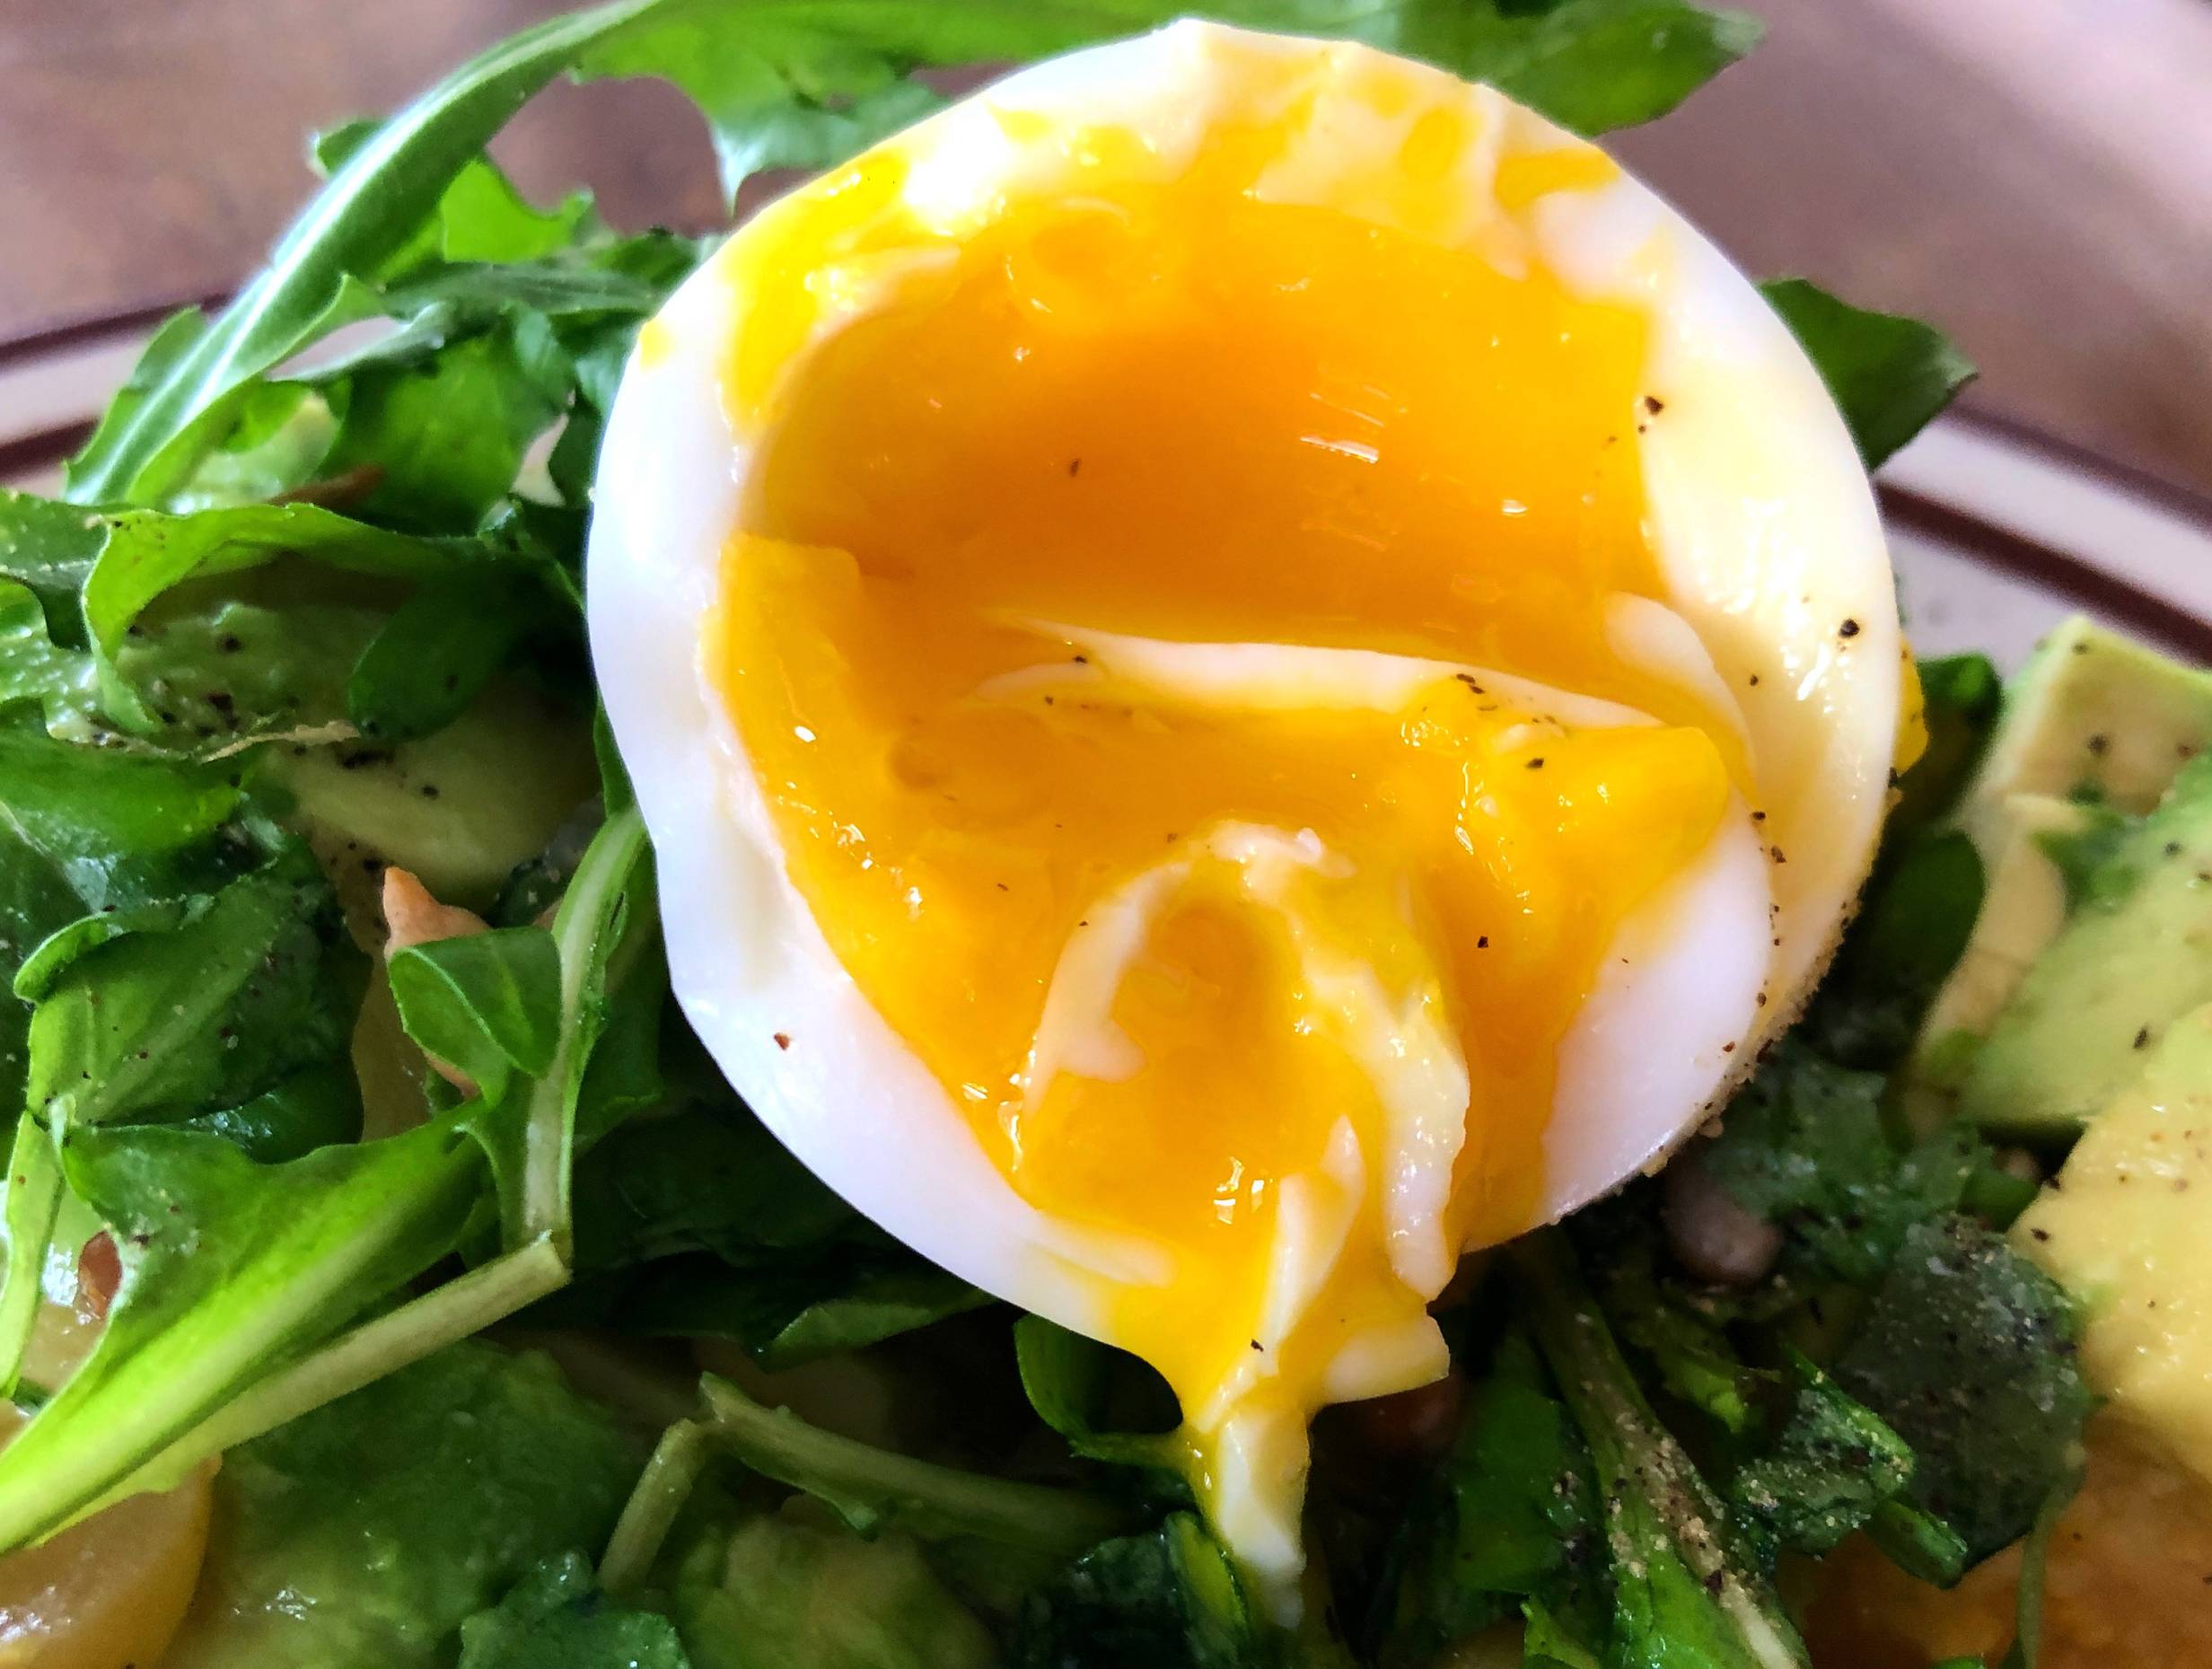 A soft boiled egg, cut open and spilling golden yellow yolk, sits on a bed of arugula and grits on a beige plate. Photo by Alyssa Buckley.